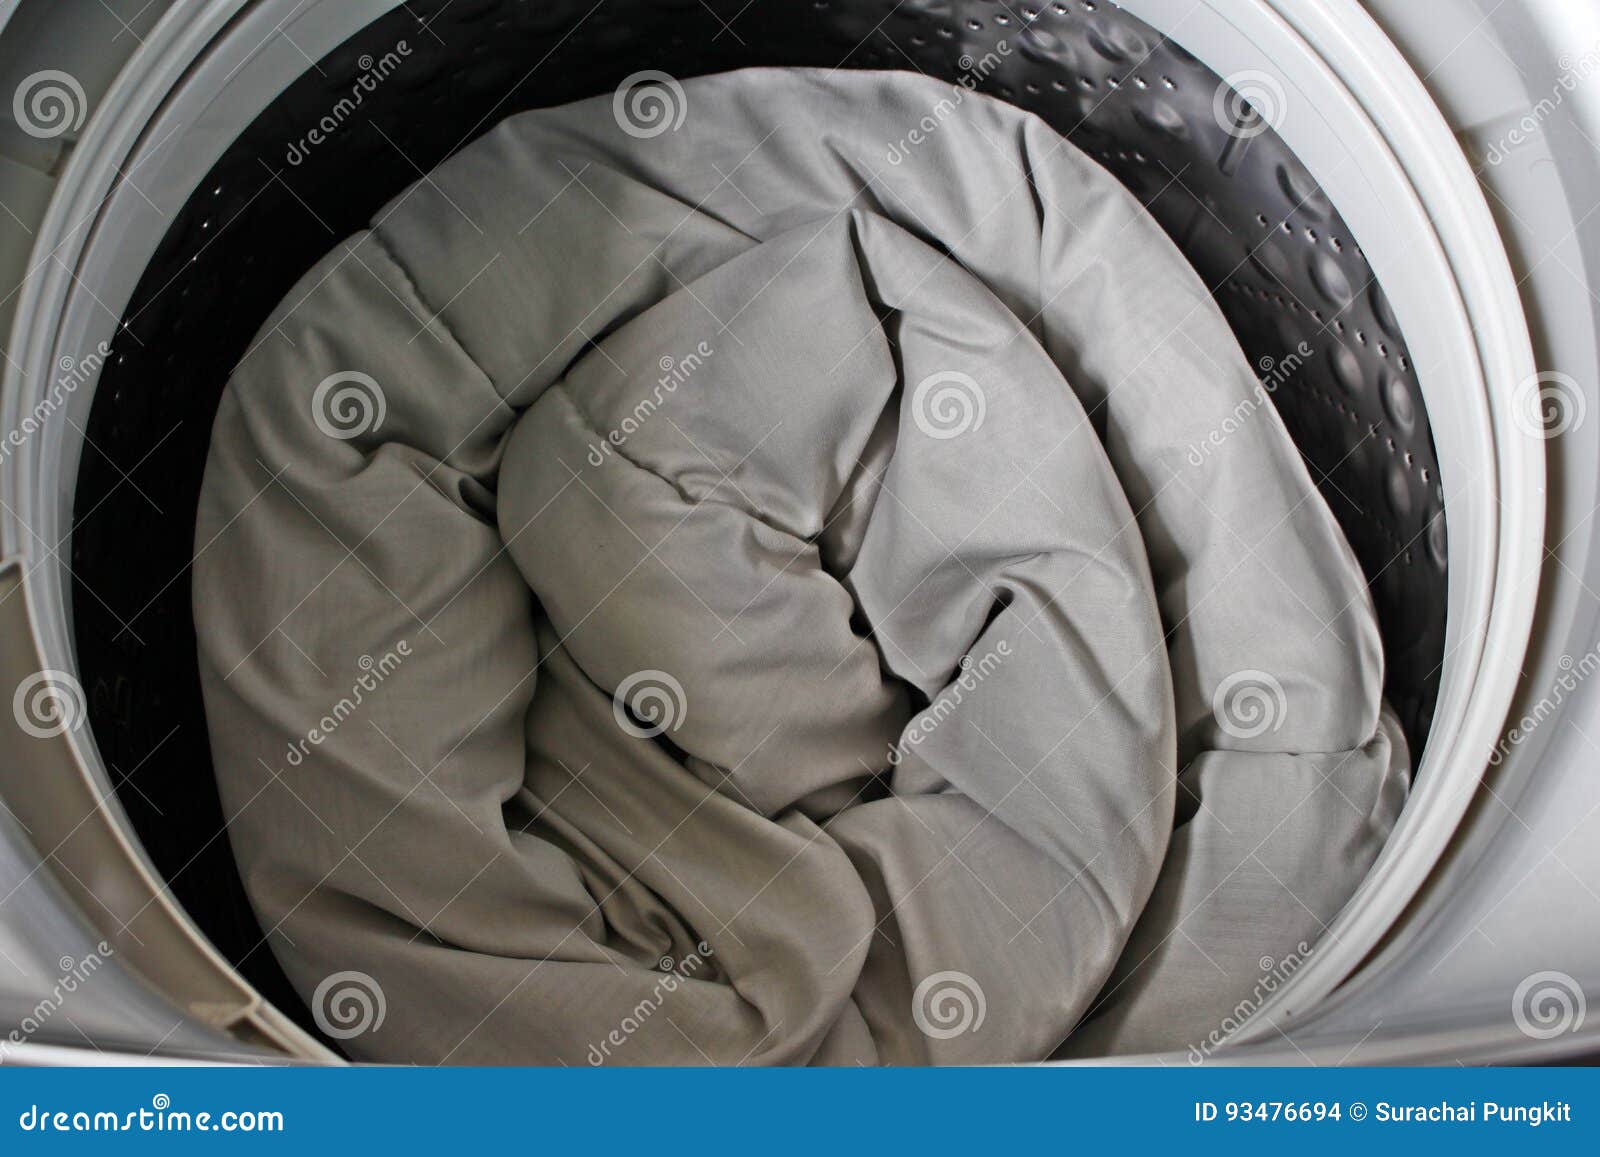 Roll Up The Duvet Stock Photo Image Of Colorful Arranged 93476694